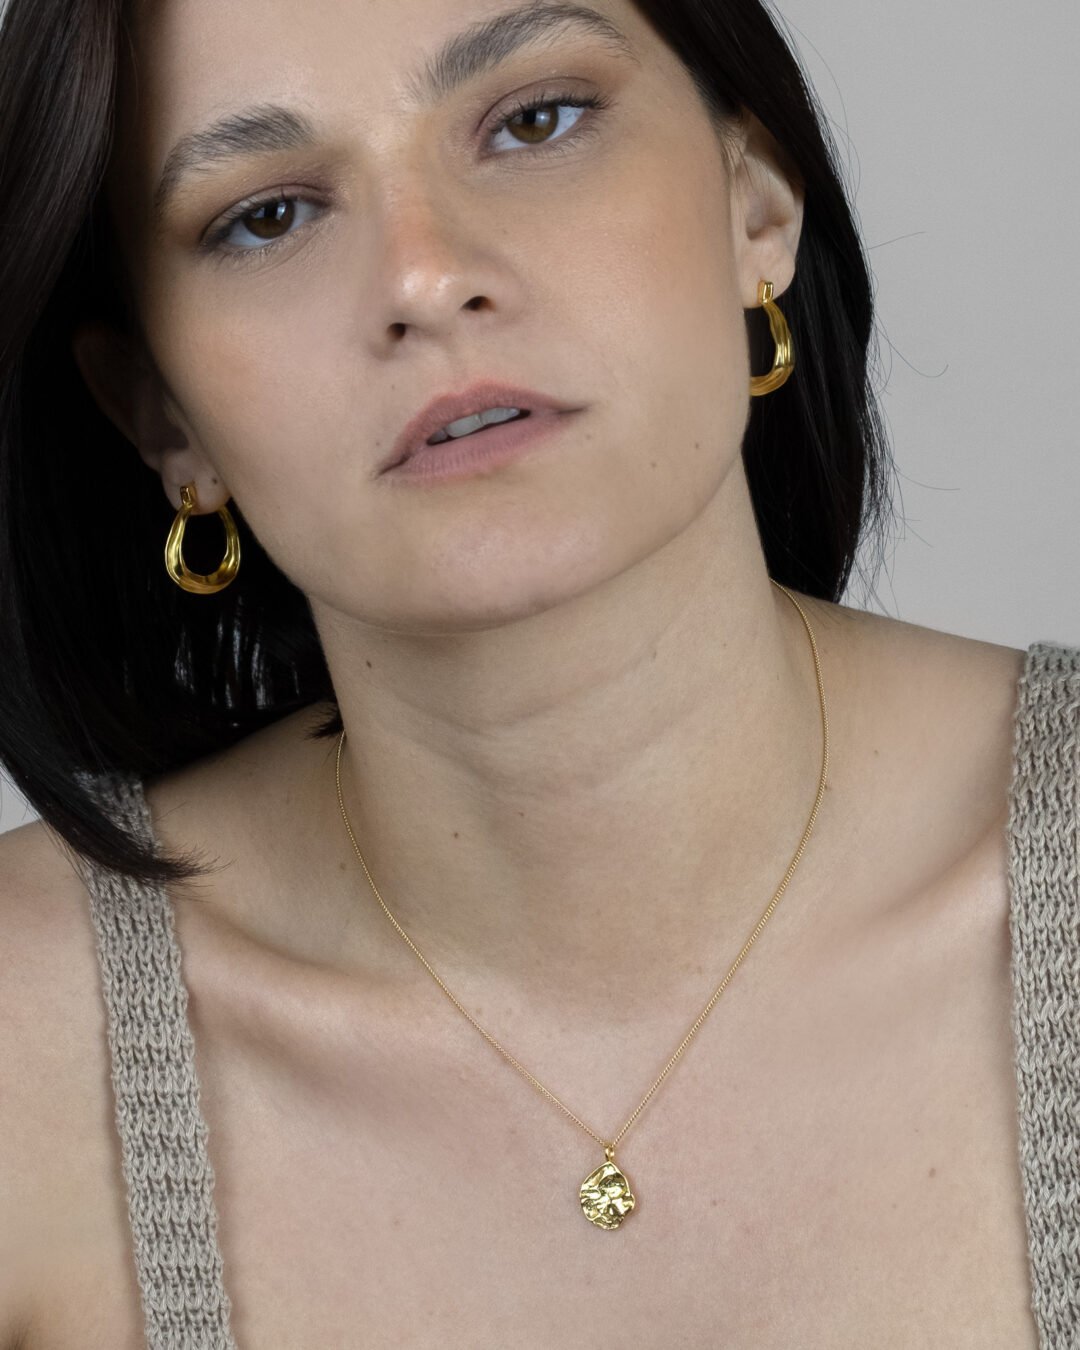 Renaissance hoops earrings, Lalaif necklace, irregular classic earrings and necklace.